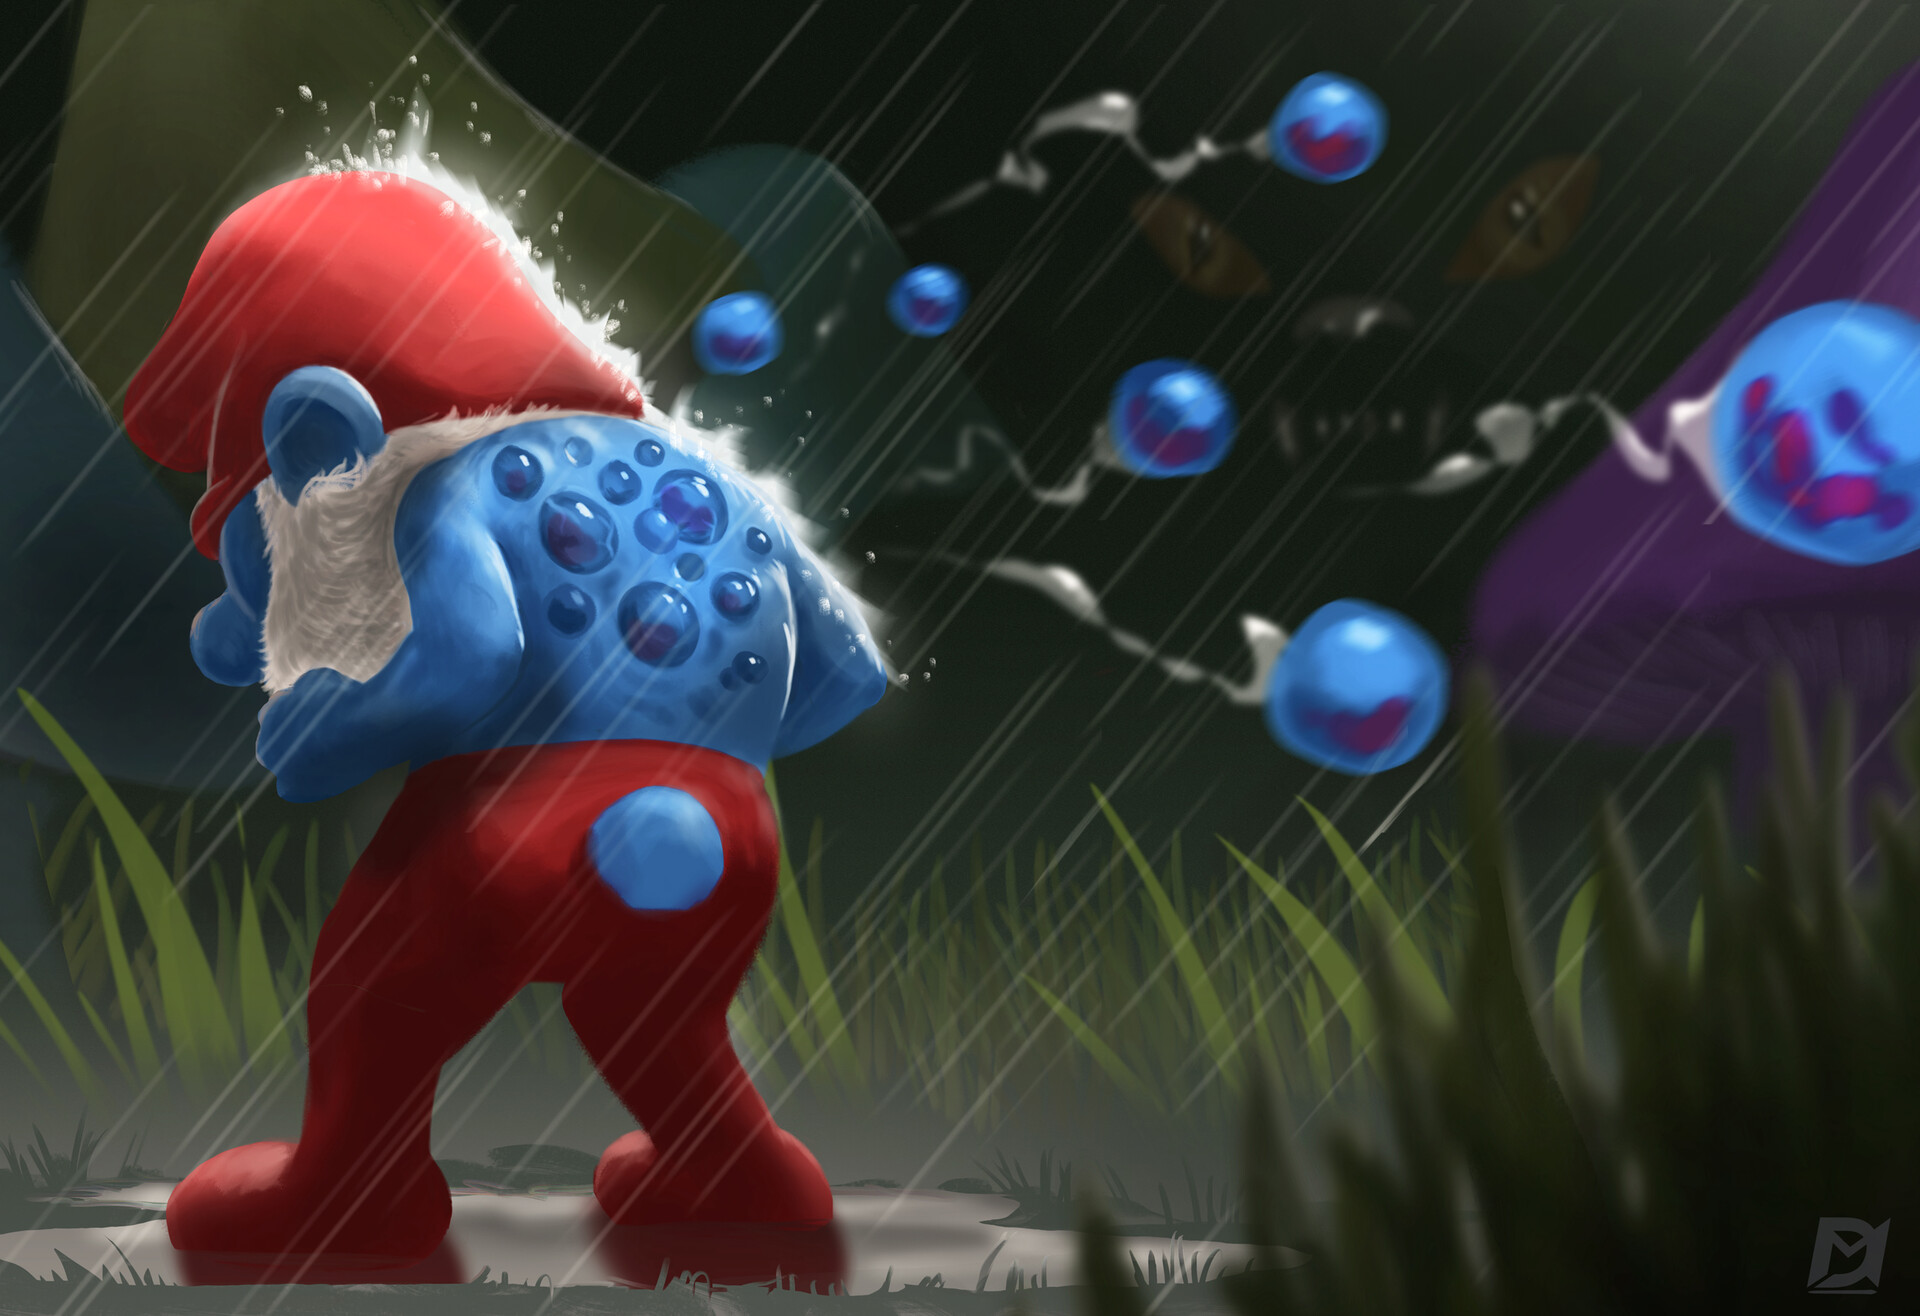 The Fascinating Origins: How were the Smurfs Born?